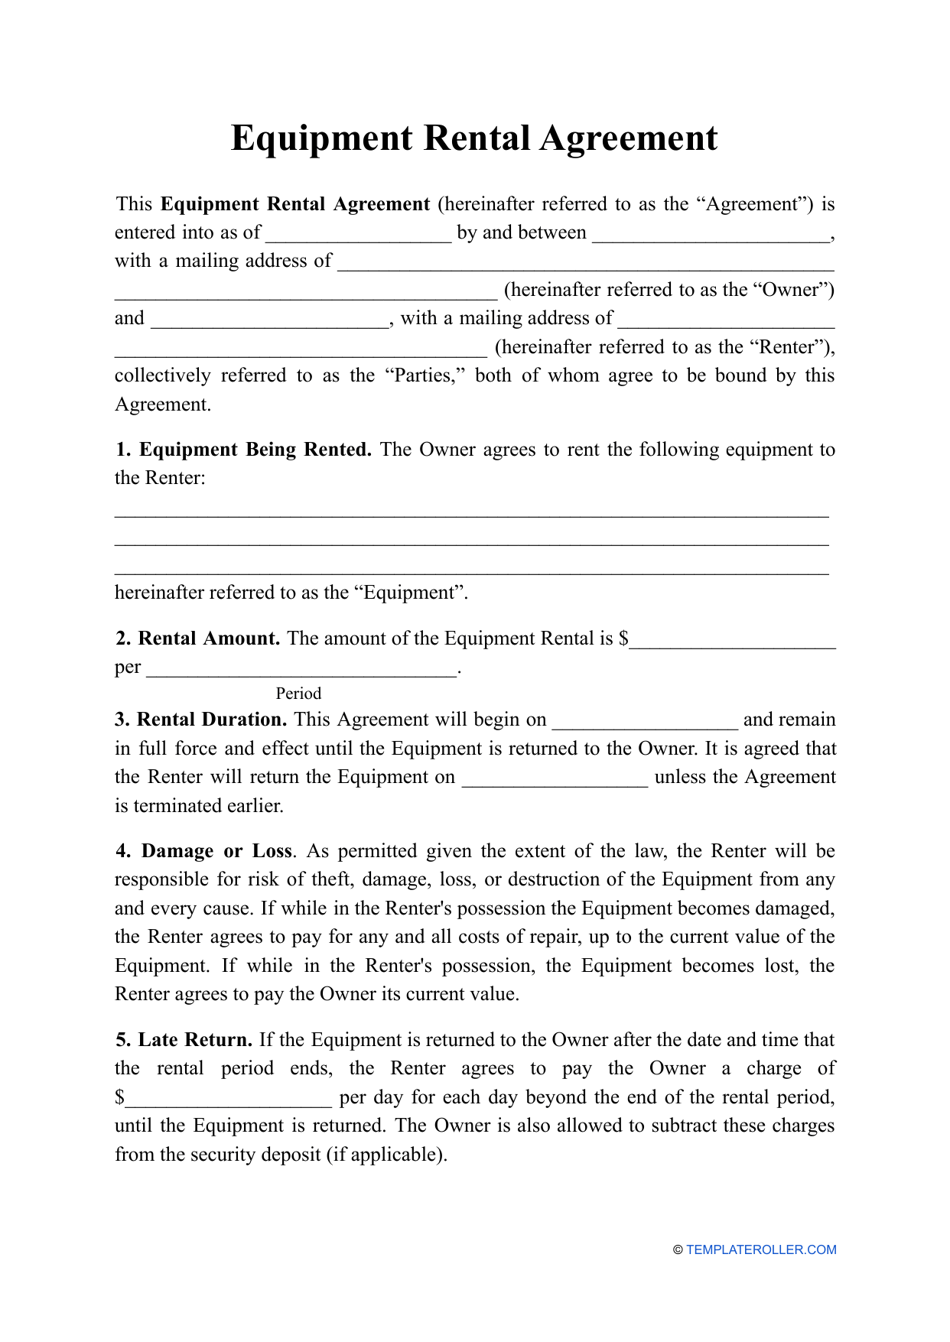 Equipment Rental Agreement Template, Page 1